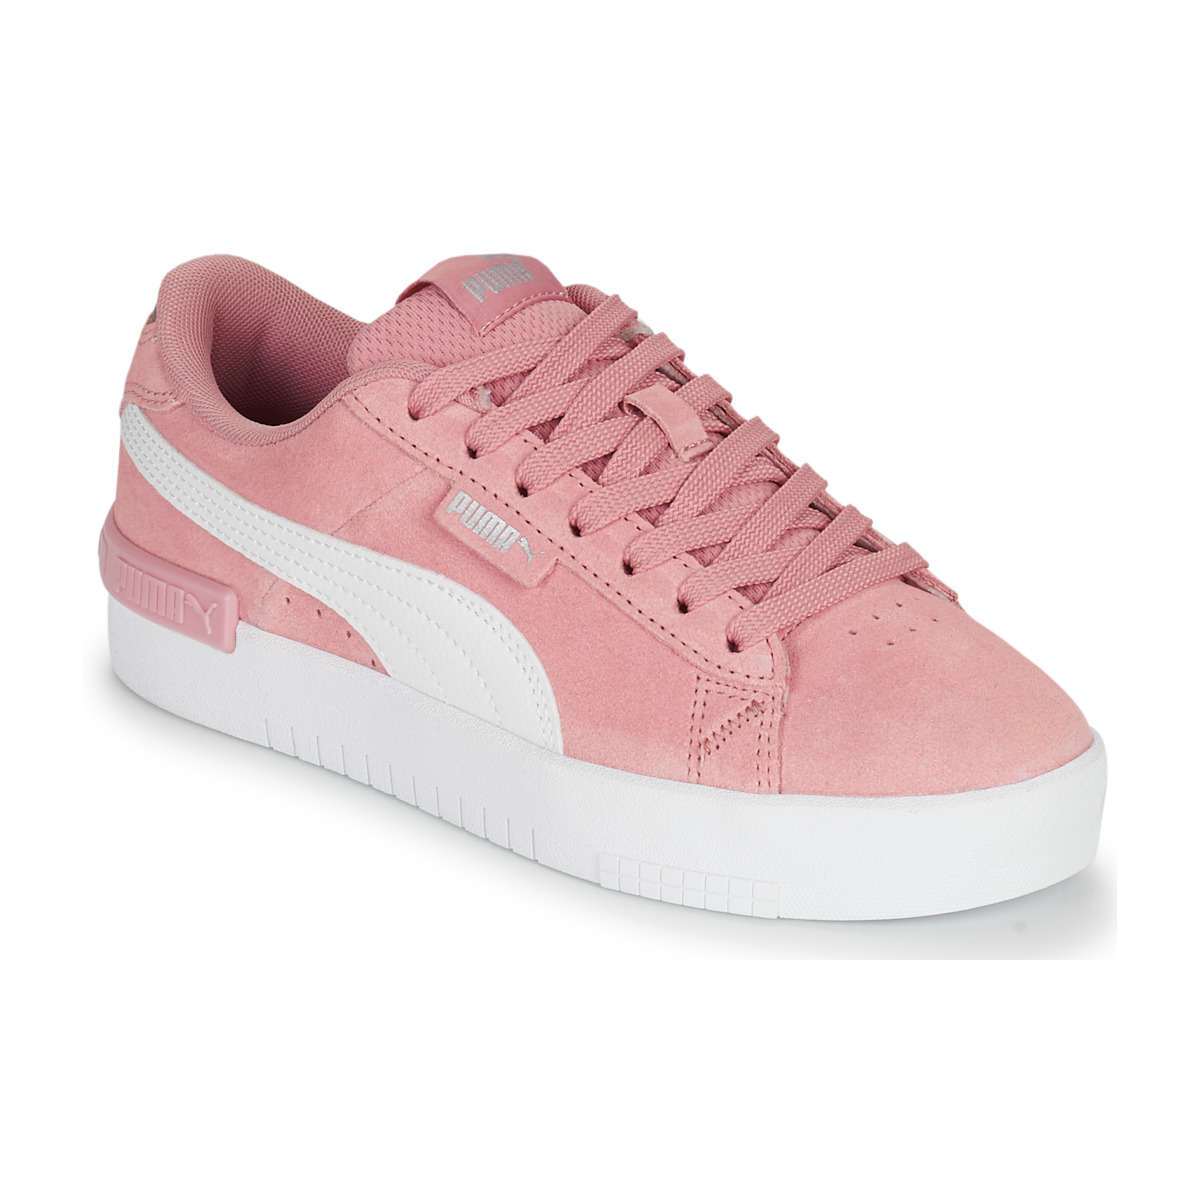 ! delivery Free / - White top - trainers Puma Women NET Pink JADA Shoes Low | Spartoo